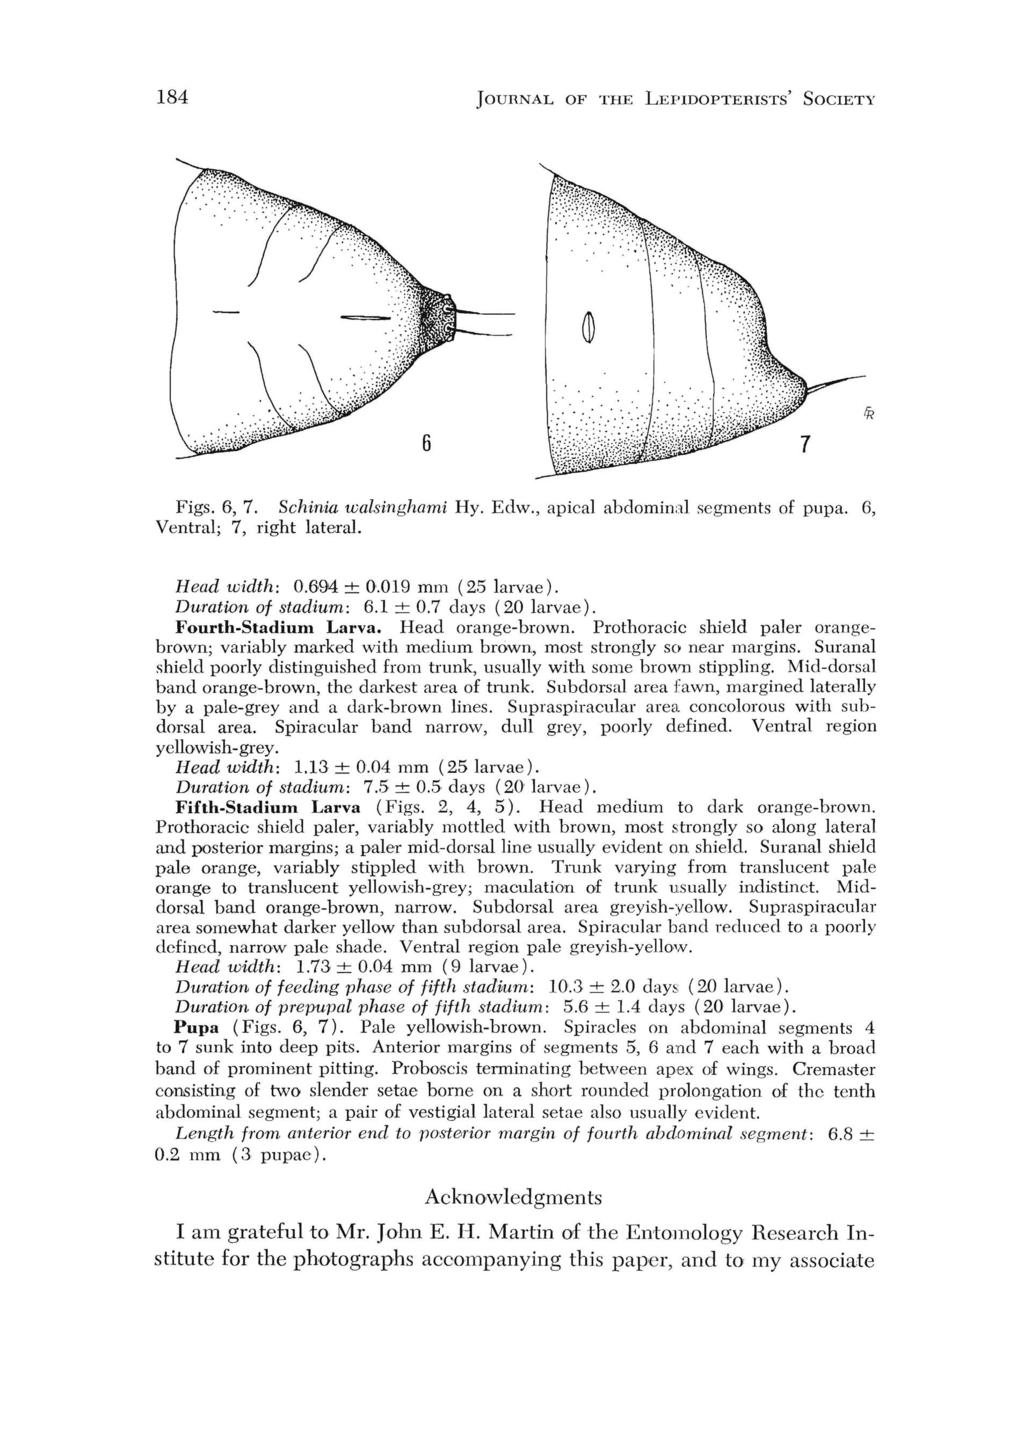 184 JOURNAL OF THE LEPIDOPTERISTS' SOCIETY Figs. 6, 7. Schinia walsinghami Hy. Edw., apical abdominal scgments of pupa. 6, Ventral; 7, right lateral. Head width: 0.694 ± 0.019 mm (2.5 larvae).